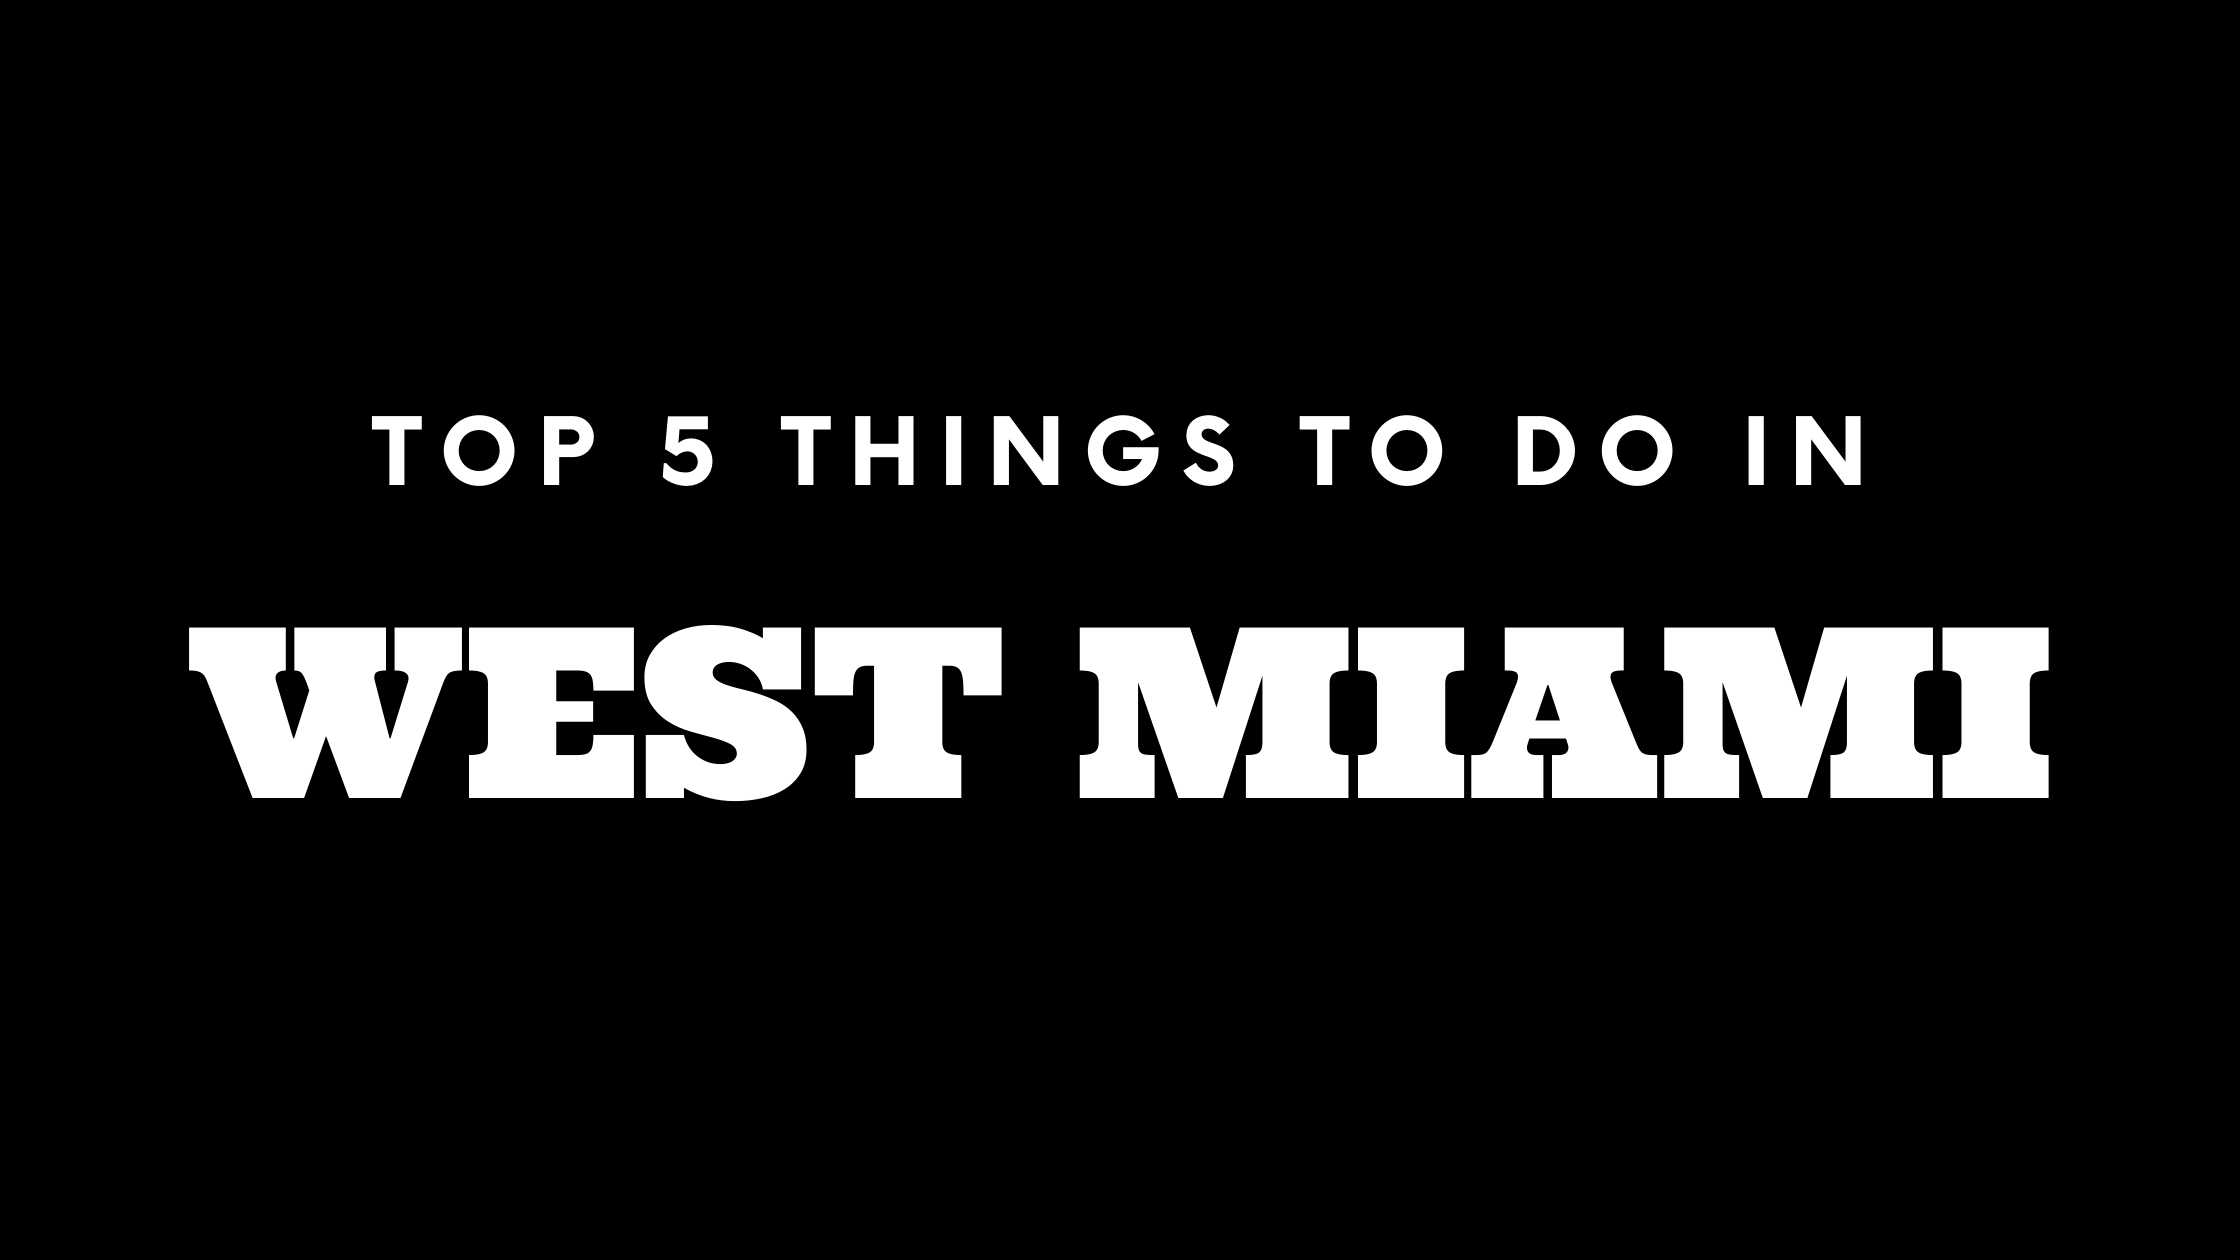 Top 5 Things To Do in West Miami